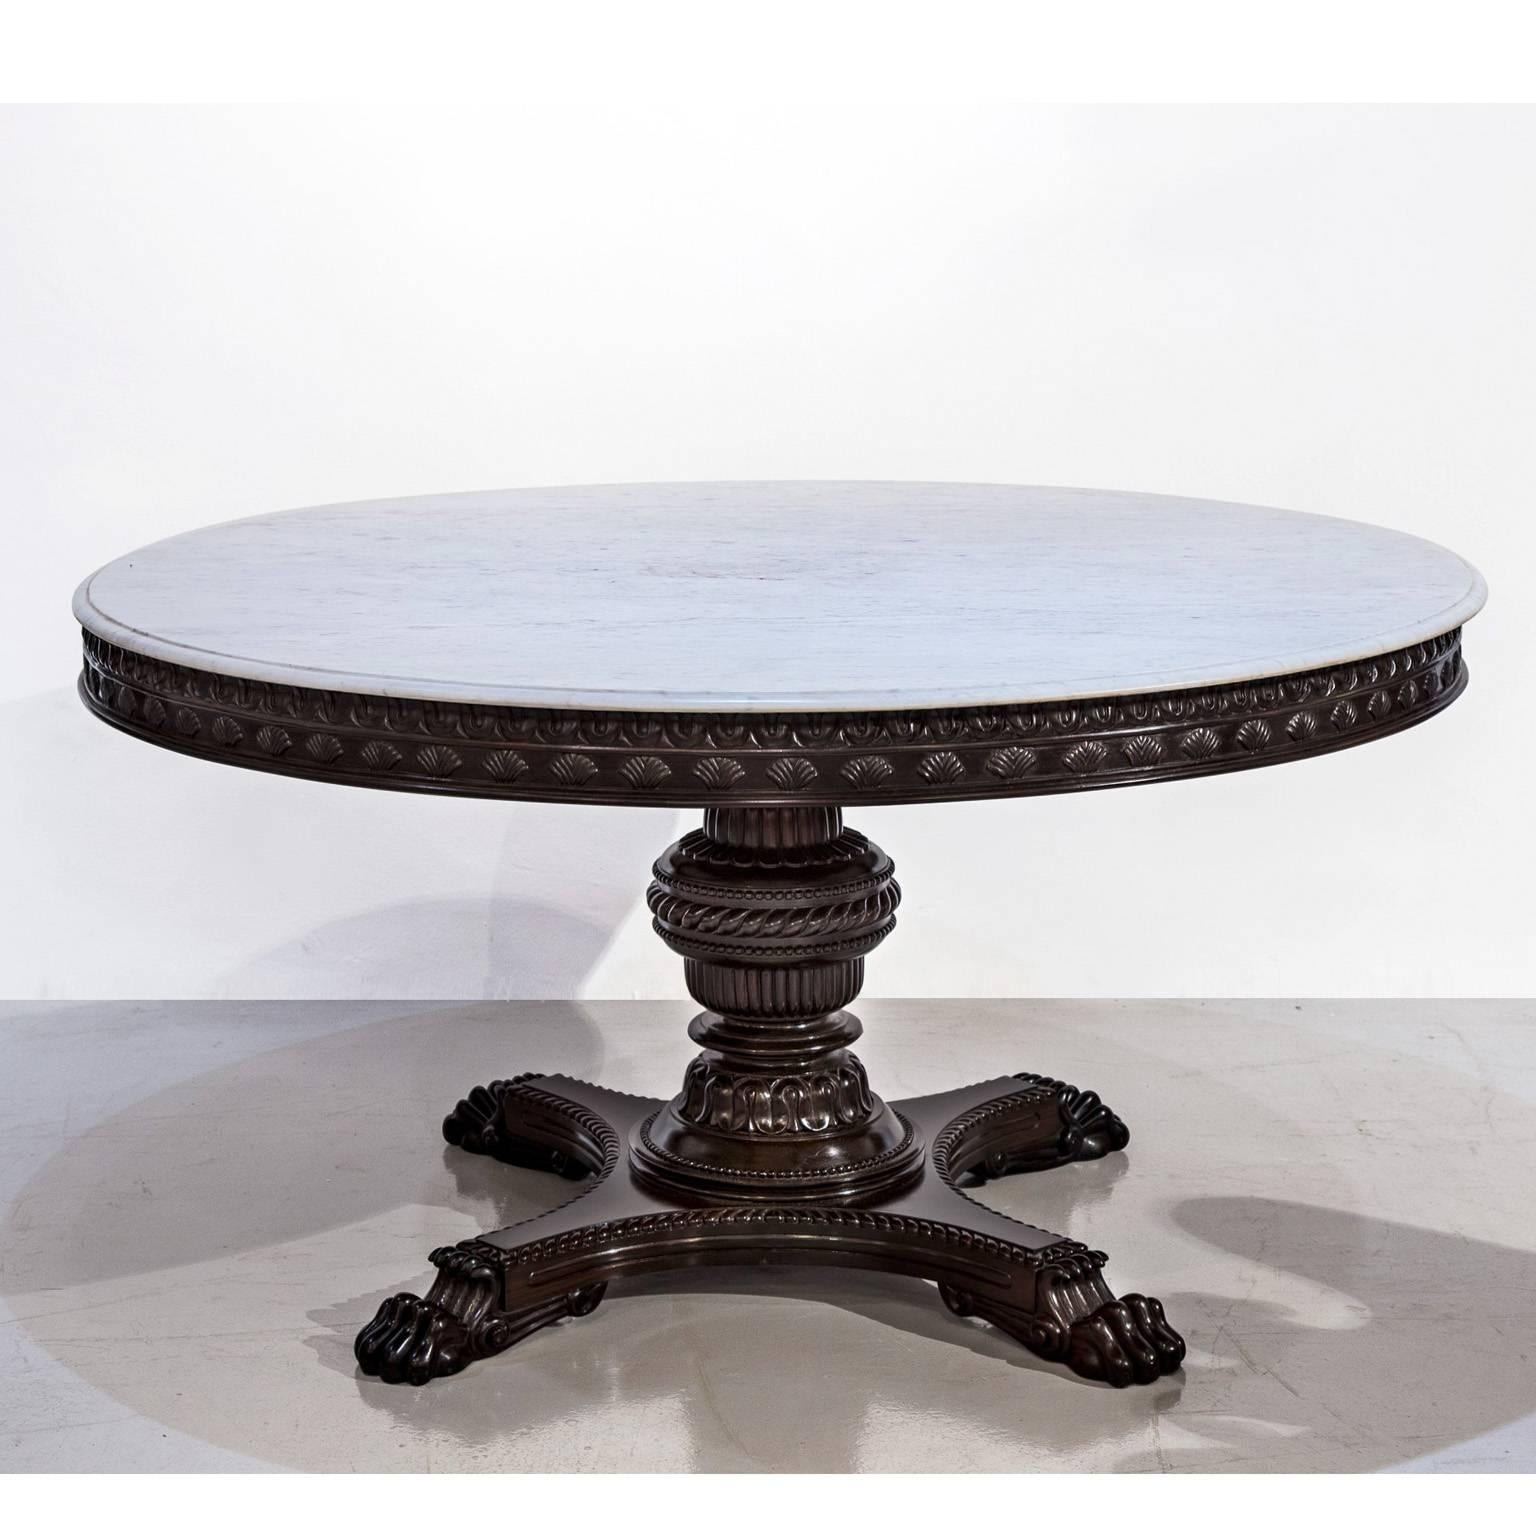 A British Colonial rosewood dining or center table with a marble top above a nicely carved apron. The baluster center support is well turned, beautifully carved and rests on a quadro-form base with claw feet.

The table was found at the Malabar